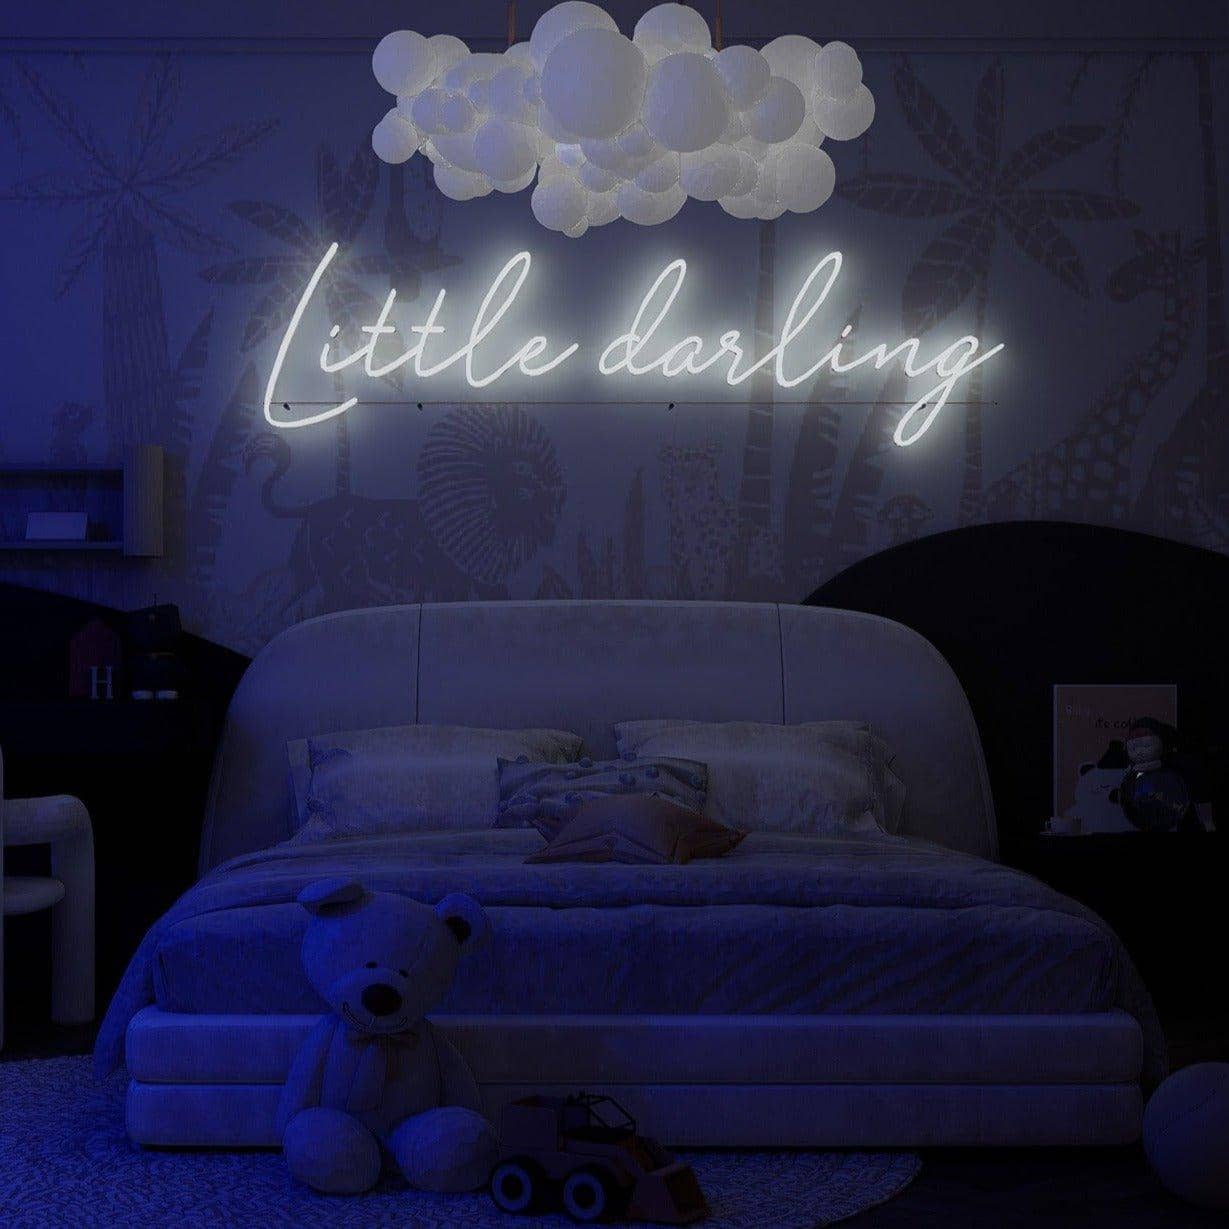 white-neon-lights-are-lit-up-and-displayed-in-the-bedroom-at-night-little-darling